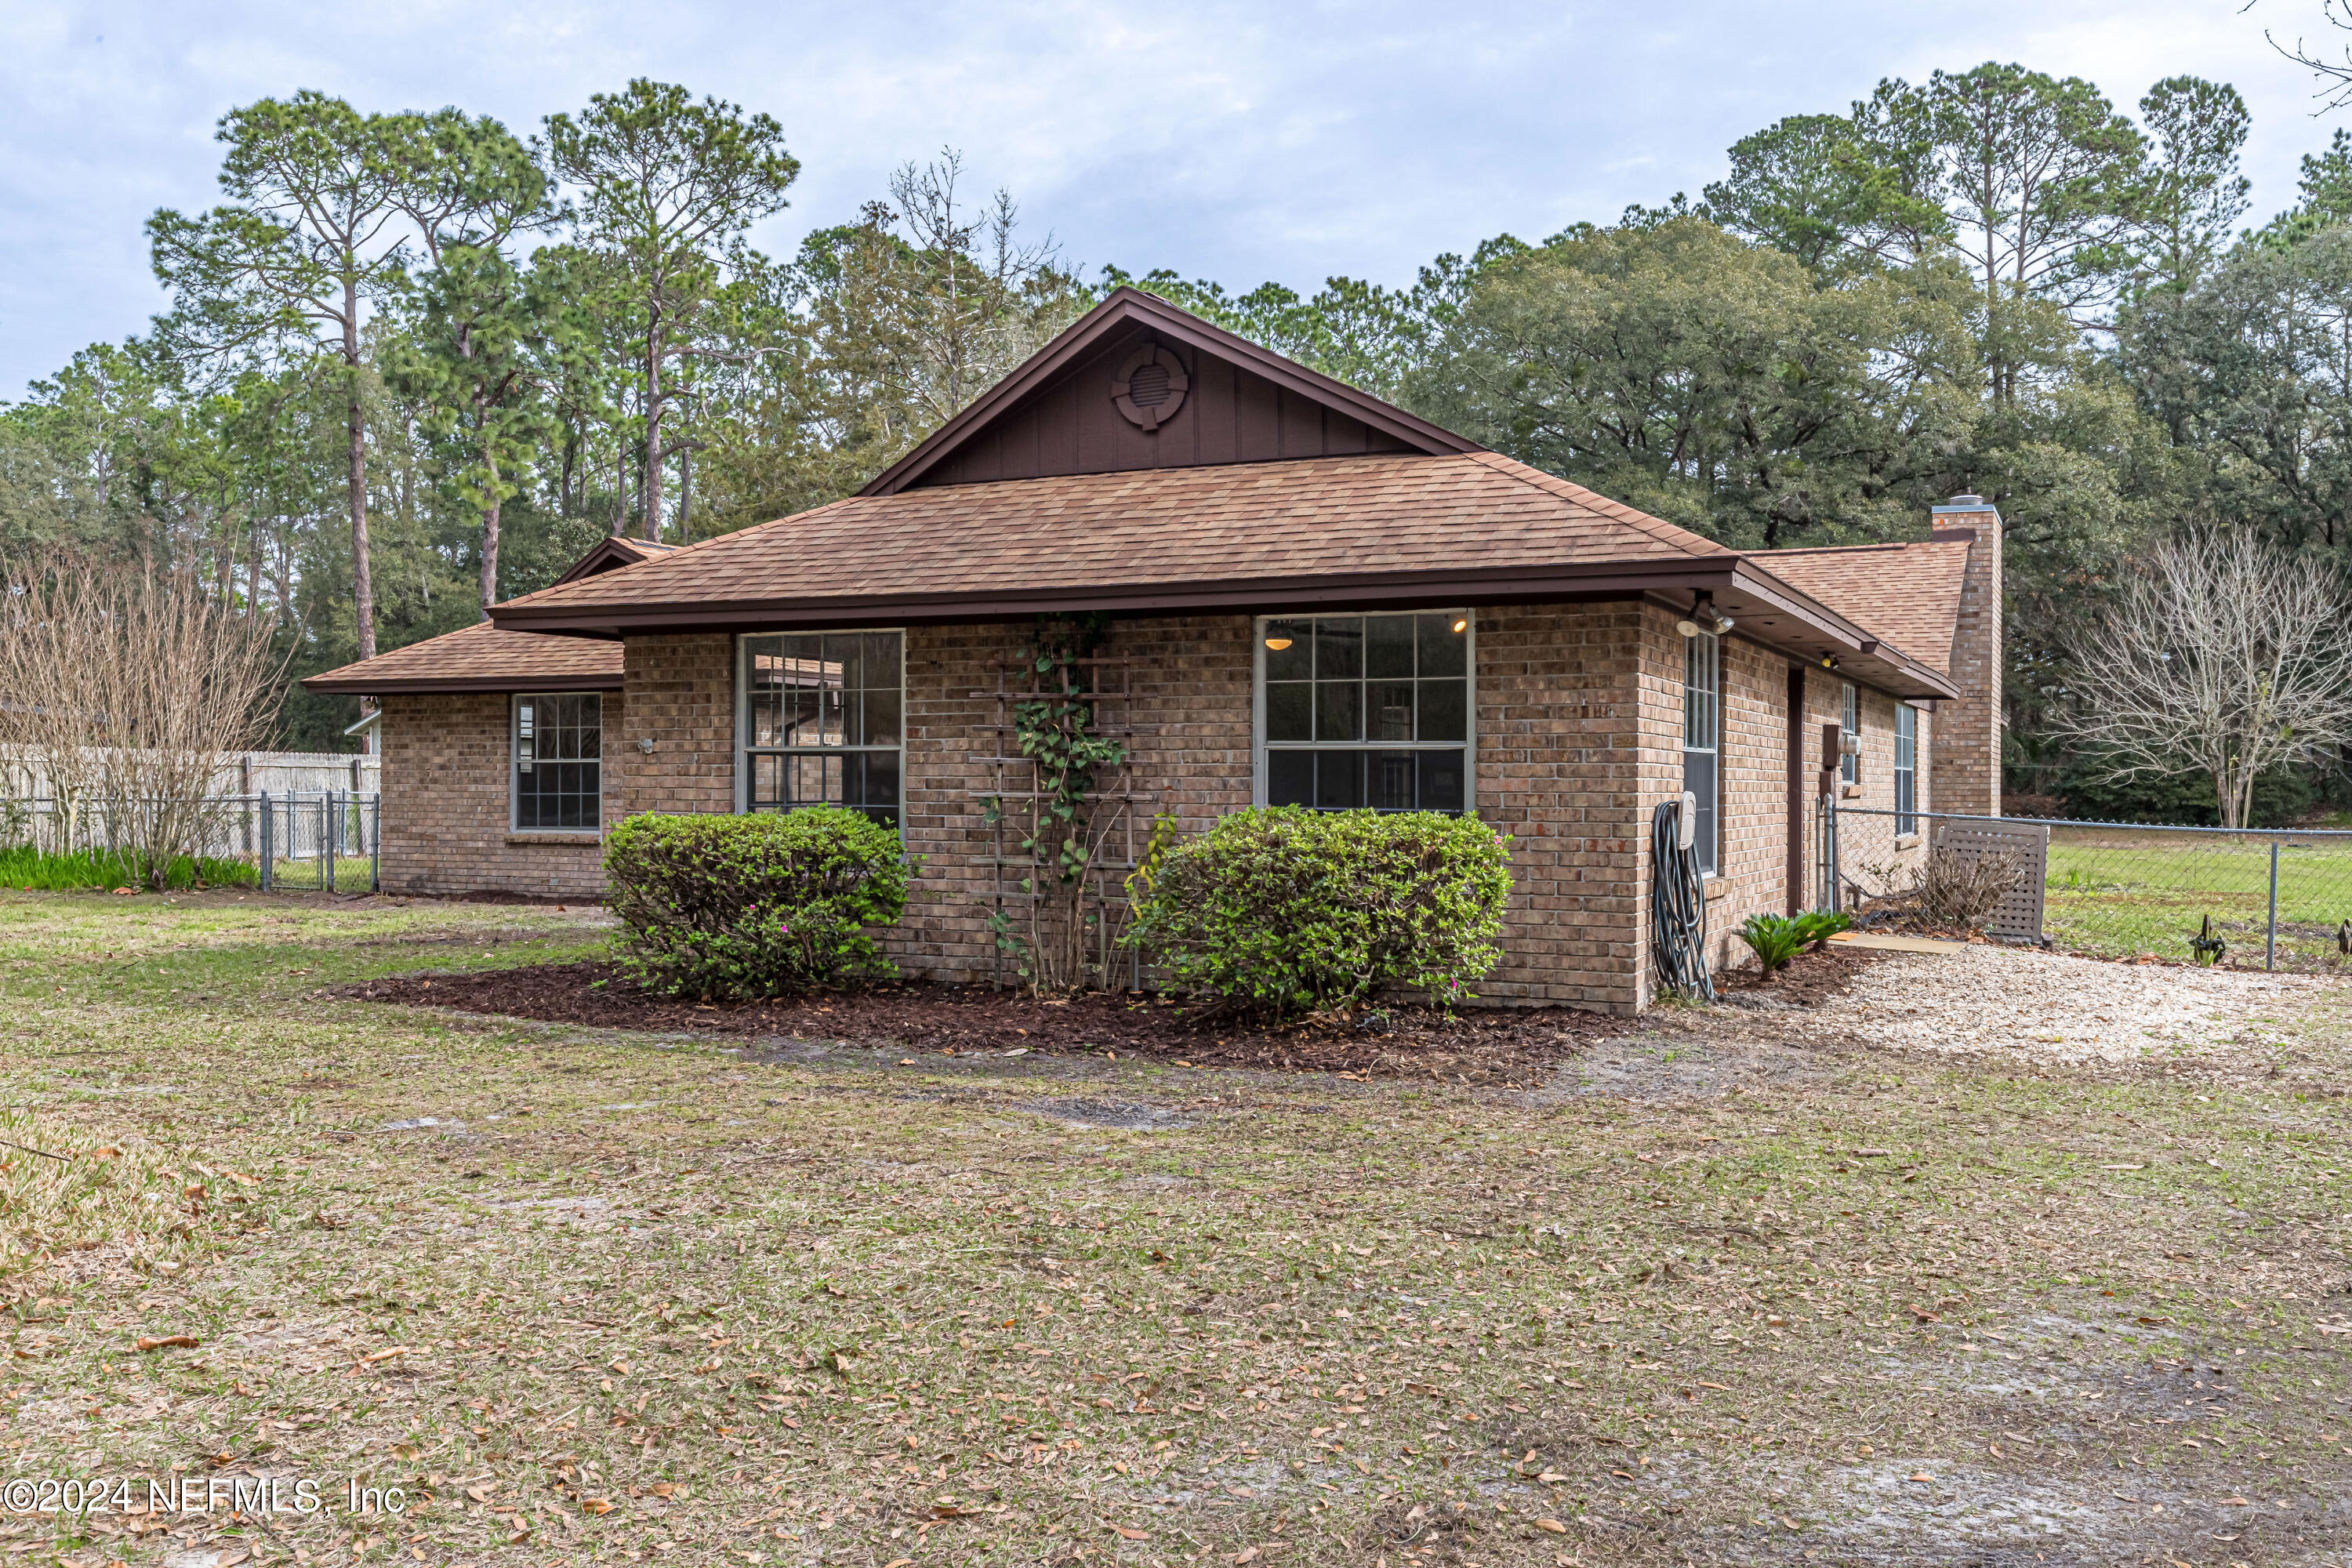 Middleburg, FL home for sale located at 1223 Foxmeadow Trail, Middleburg, FL 32068